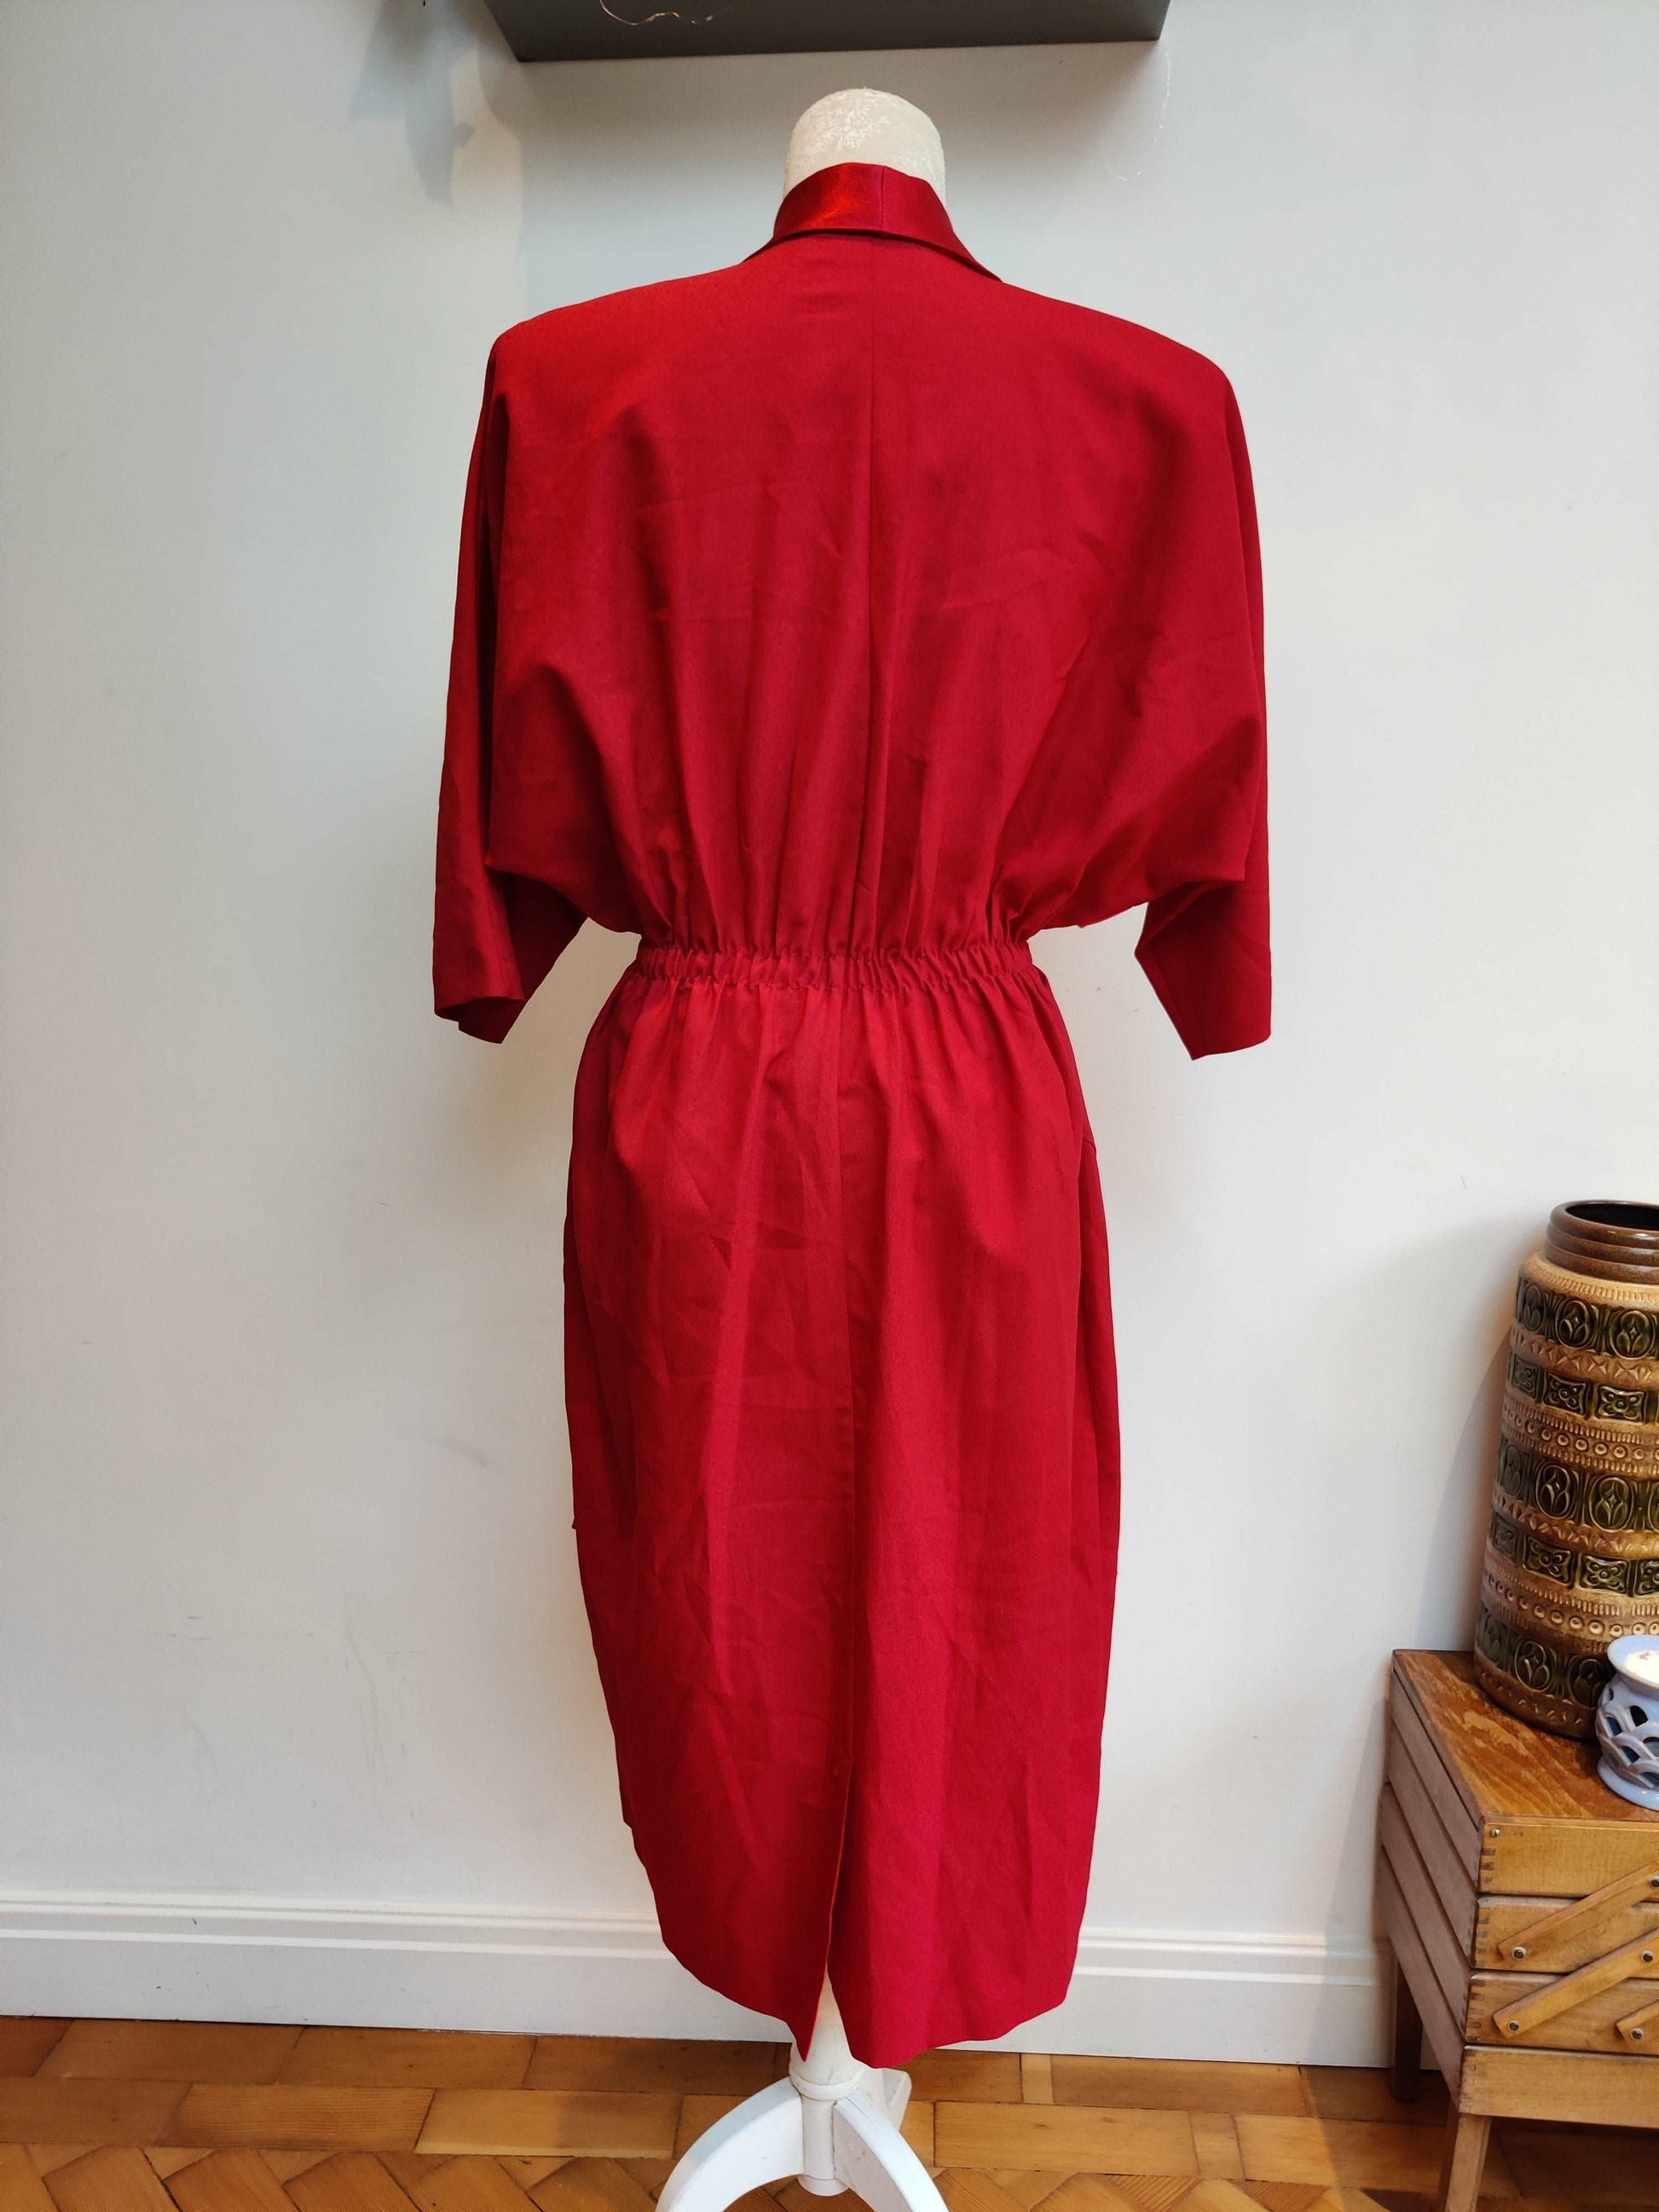 Vintage red dress with double breasted design.